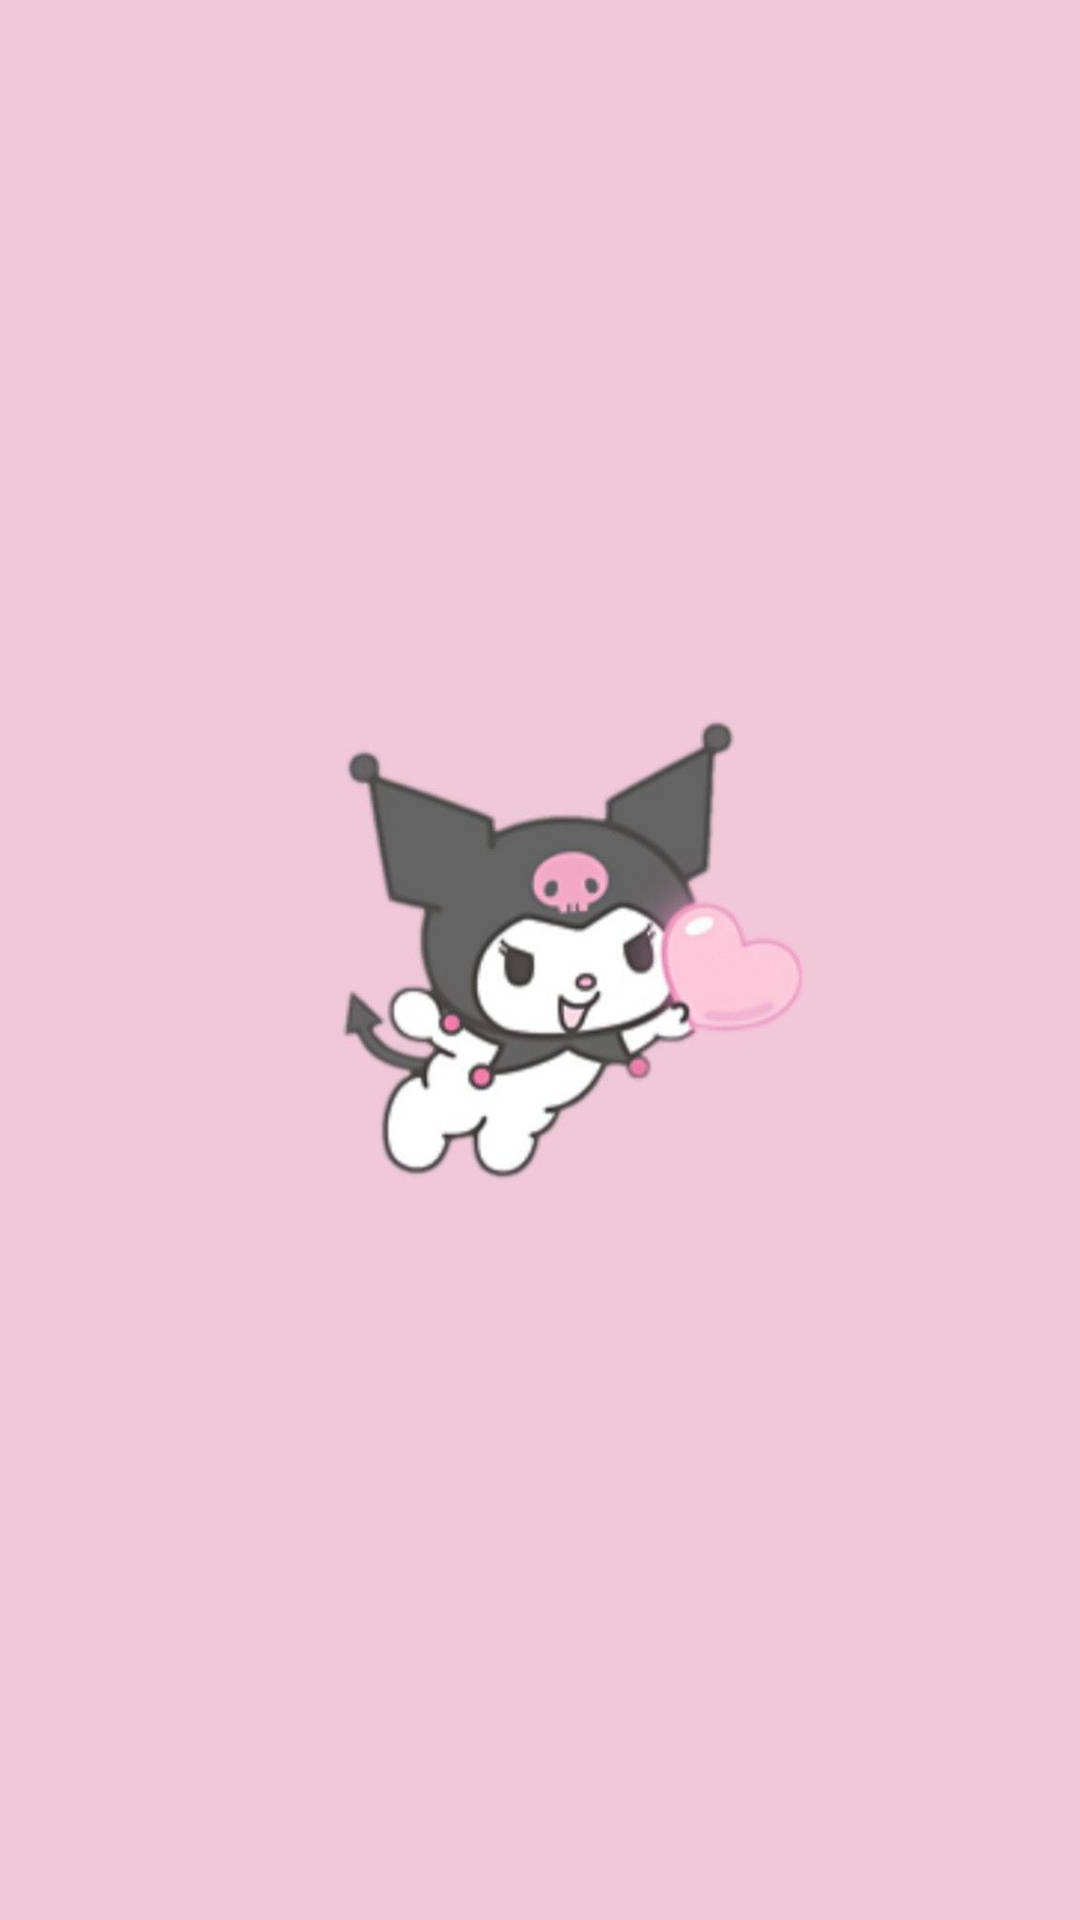 Rival Of My Melody Kuromi Holding Heart Background